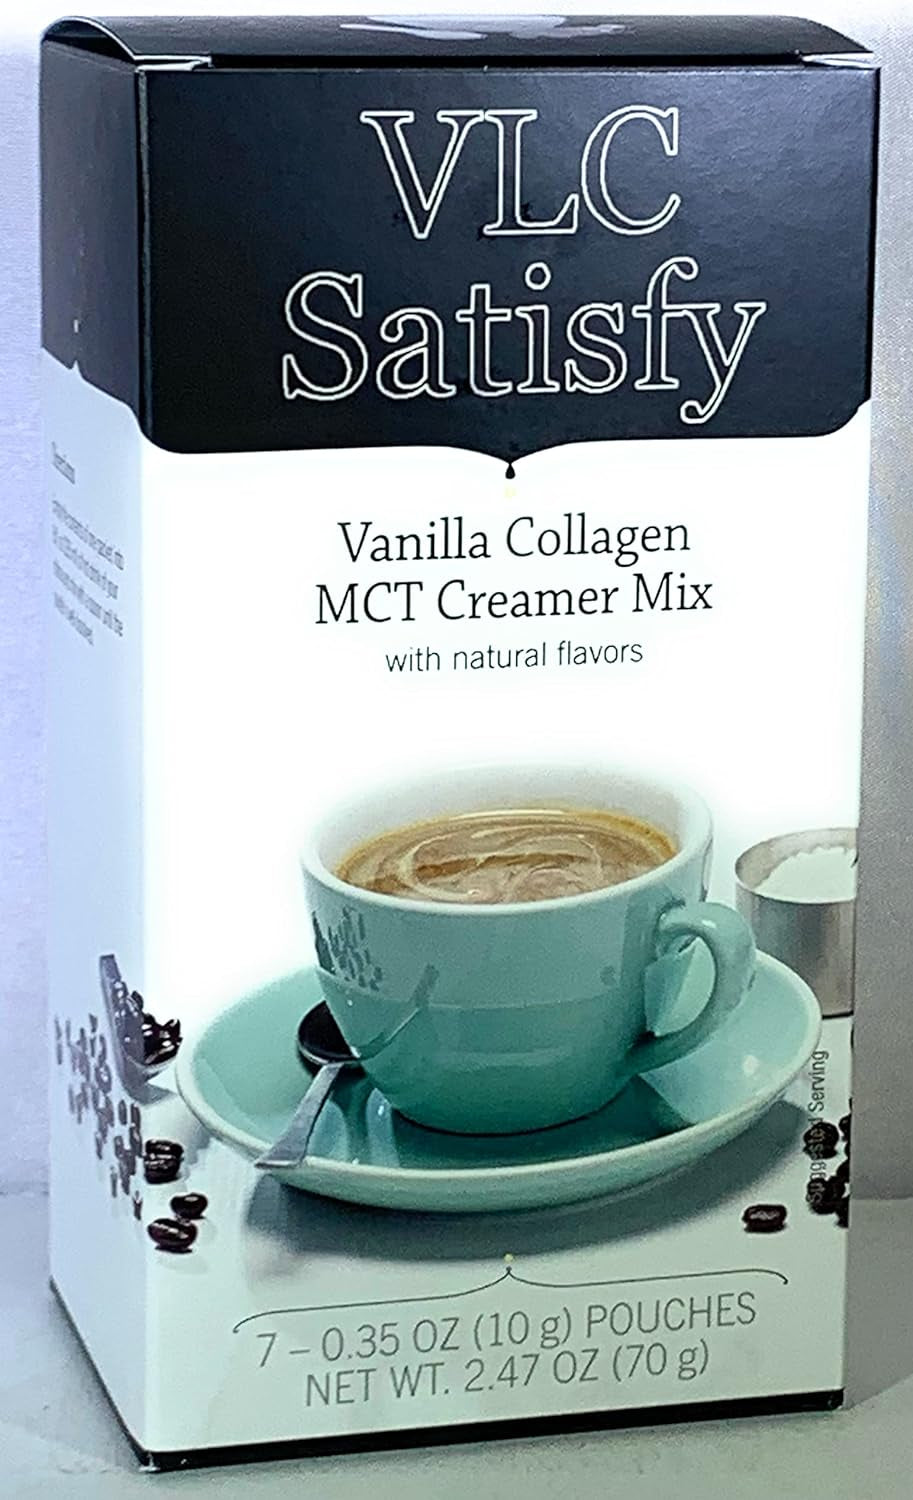 Proti King Very Low Carb Vanilla Collagen Medium Chain Triglycerides Creamer Mix - 7 Servings - 60 Calories - 3 G Protein - 1G NET Carb